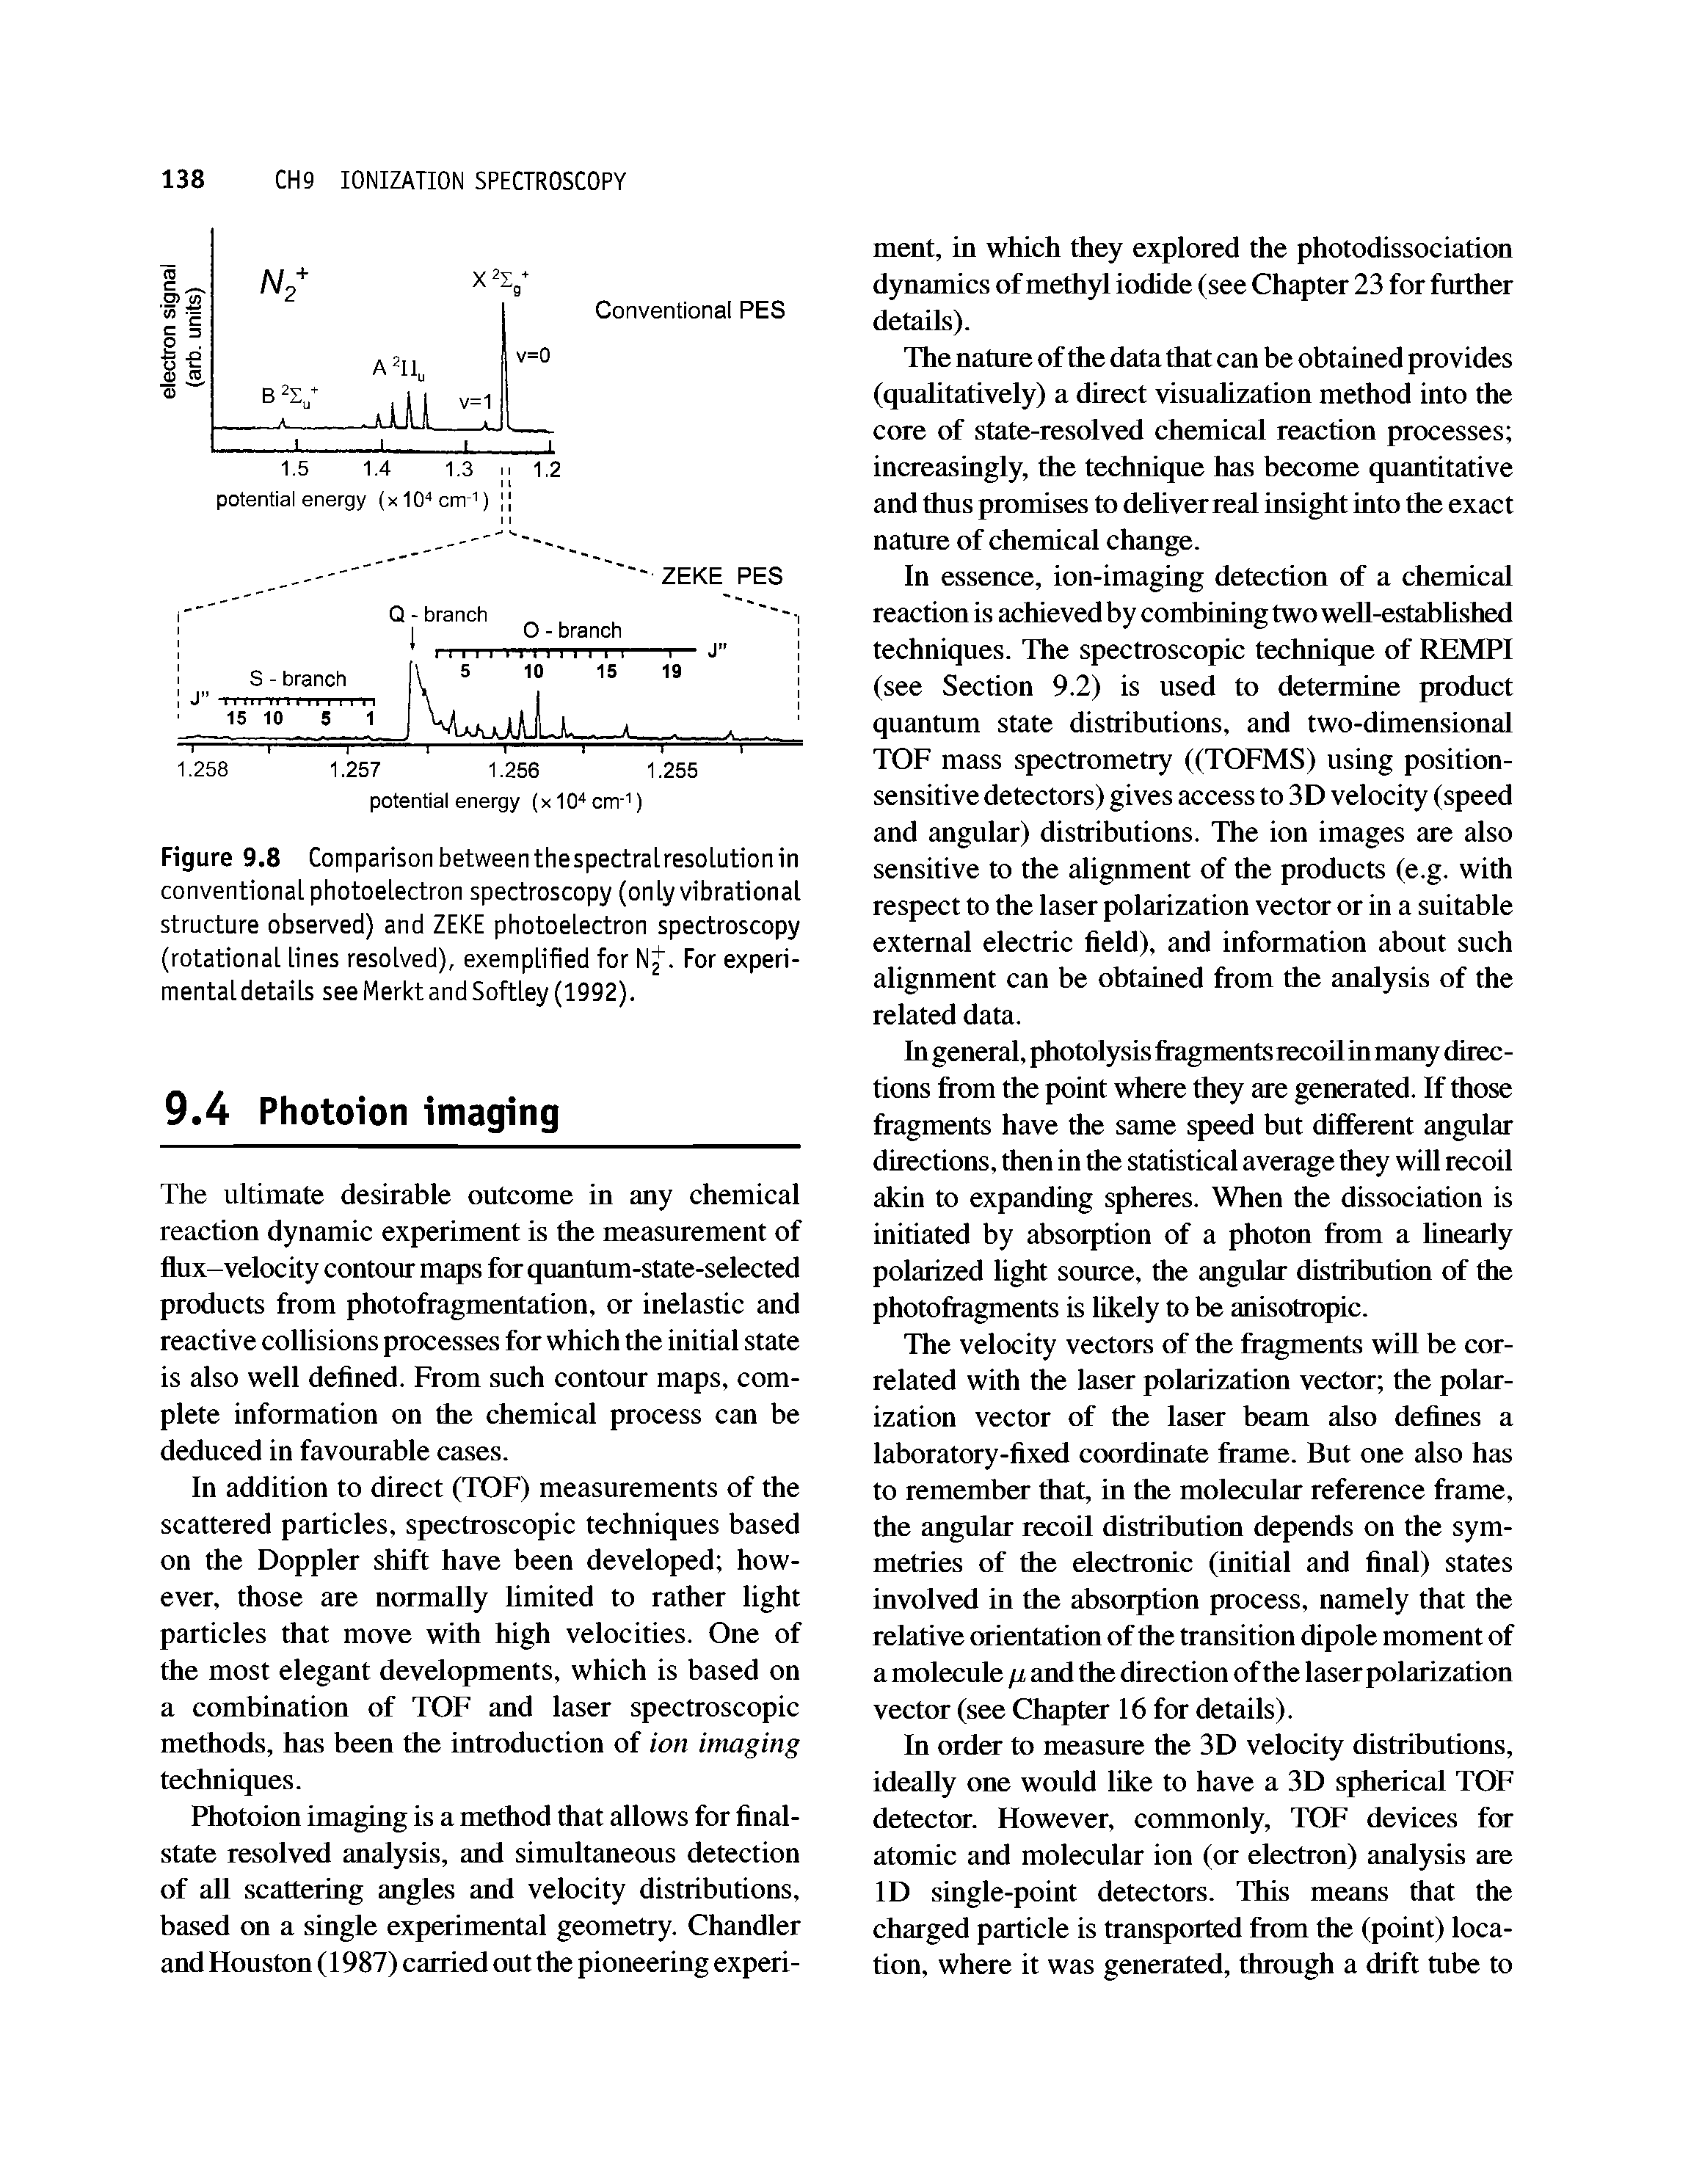 Figure 9.8 Comparison between thespectralresolutionin conventional photoelectron spectroscopy (only vibrational structure observed) and ZEKE photoelectron spectroscopy (rotational lines resolved), exemplified for N. For experimental details see Merkt and Softley (1992).